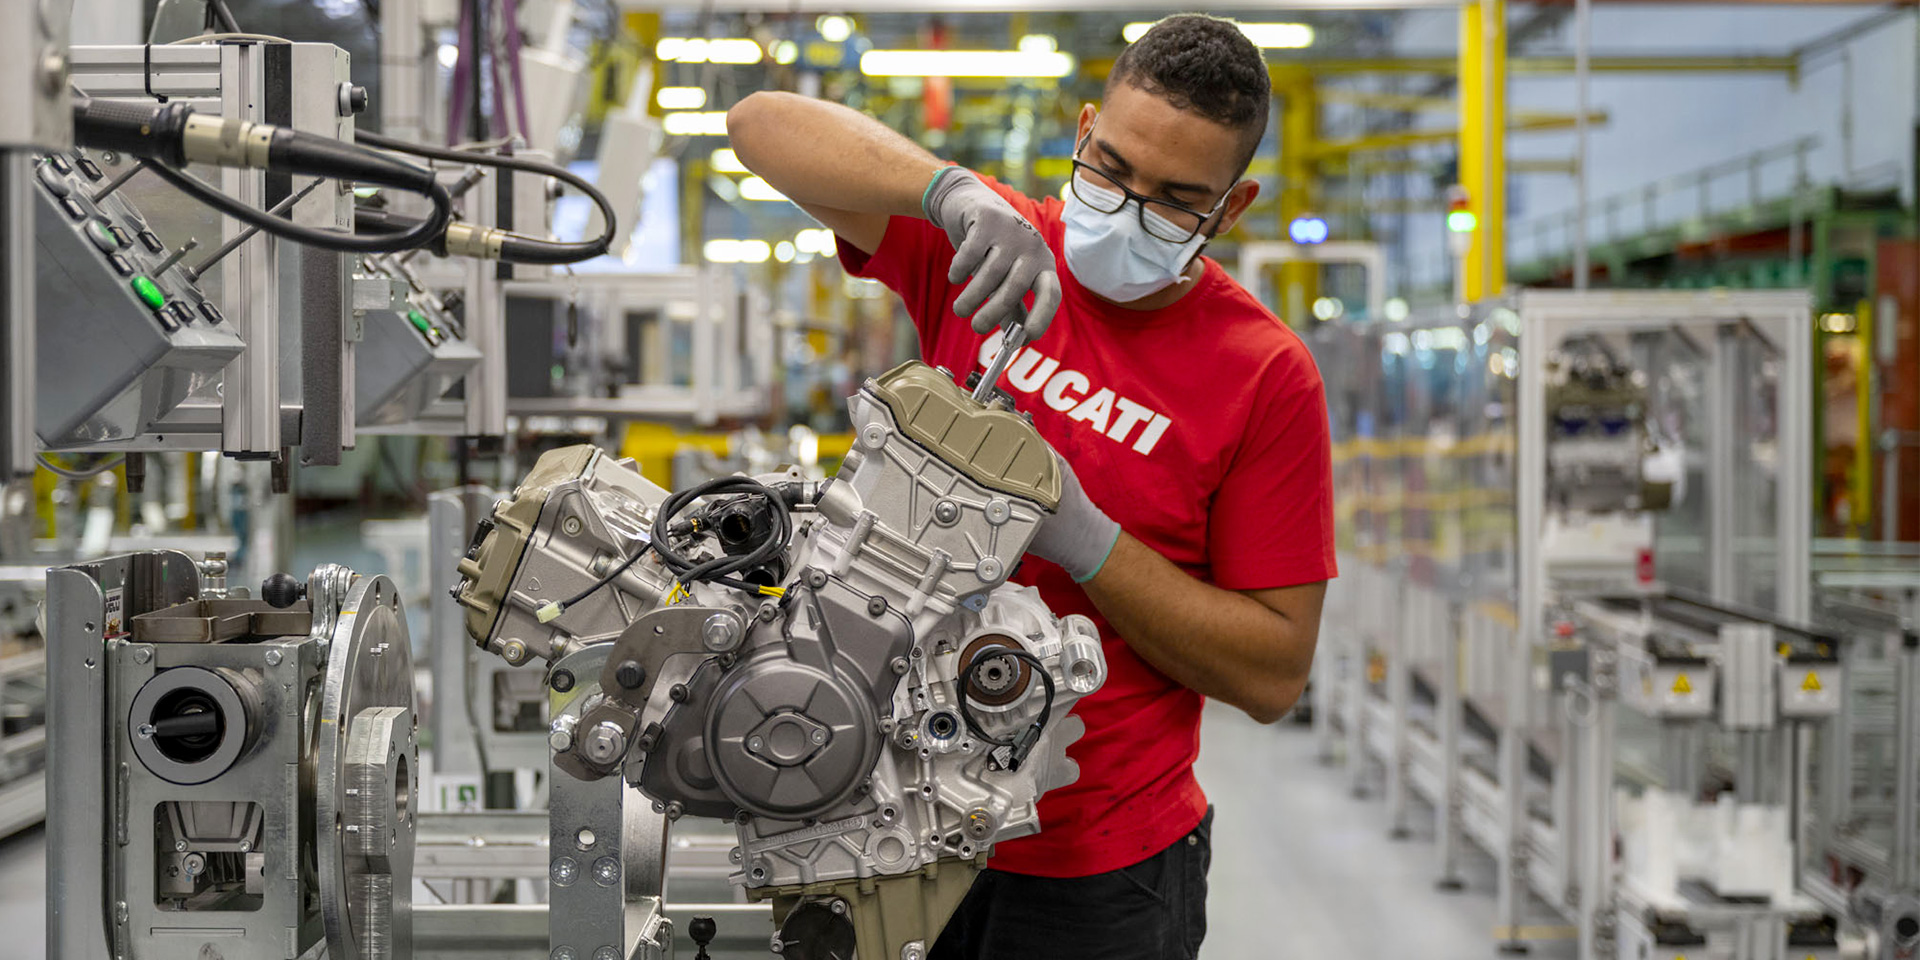 Panigale Experience the Ducati Factory tours are back